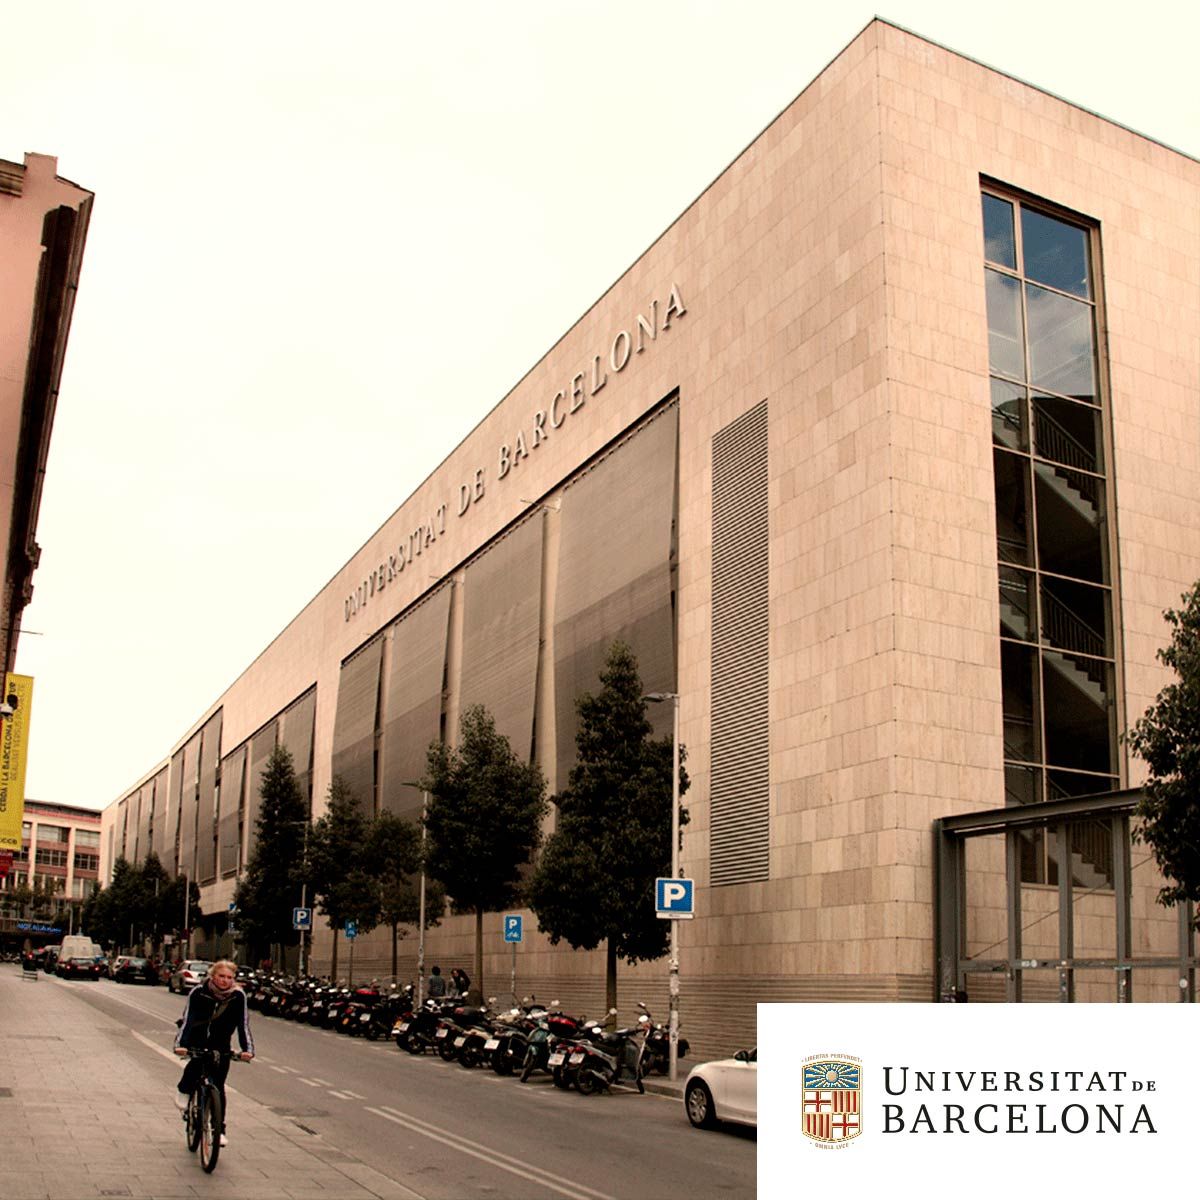 Landivar participates in the sports championship at the University of Barcelona